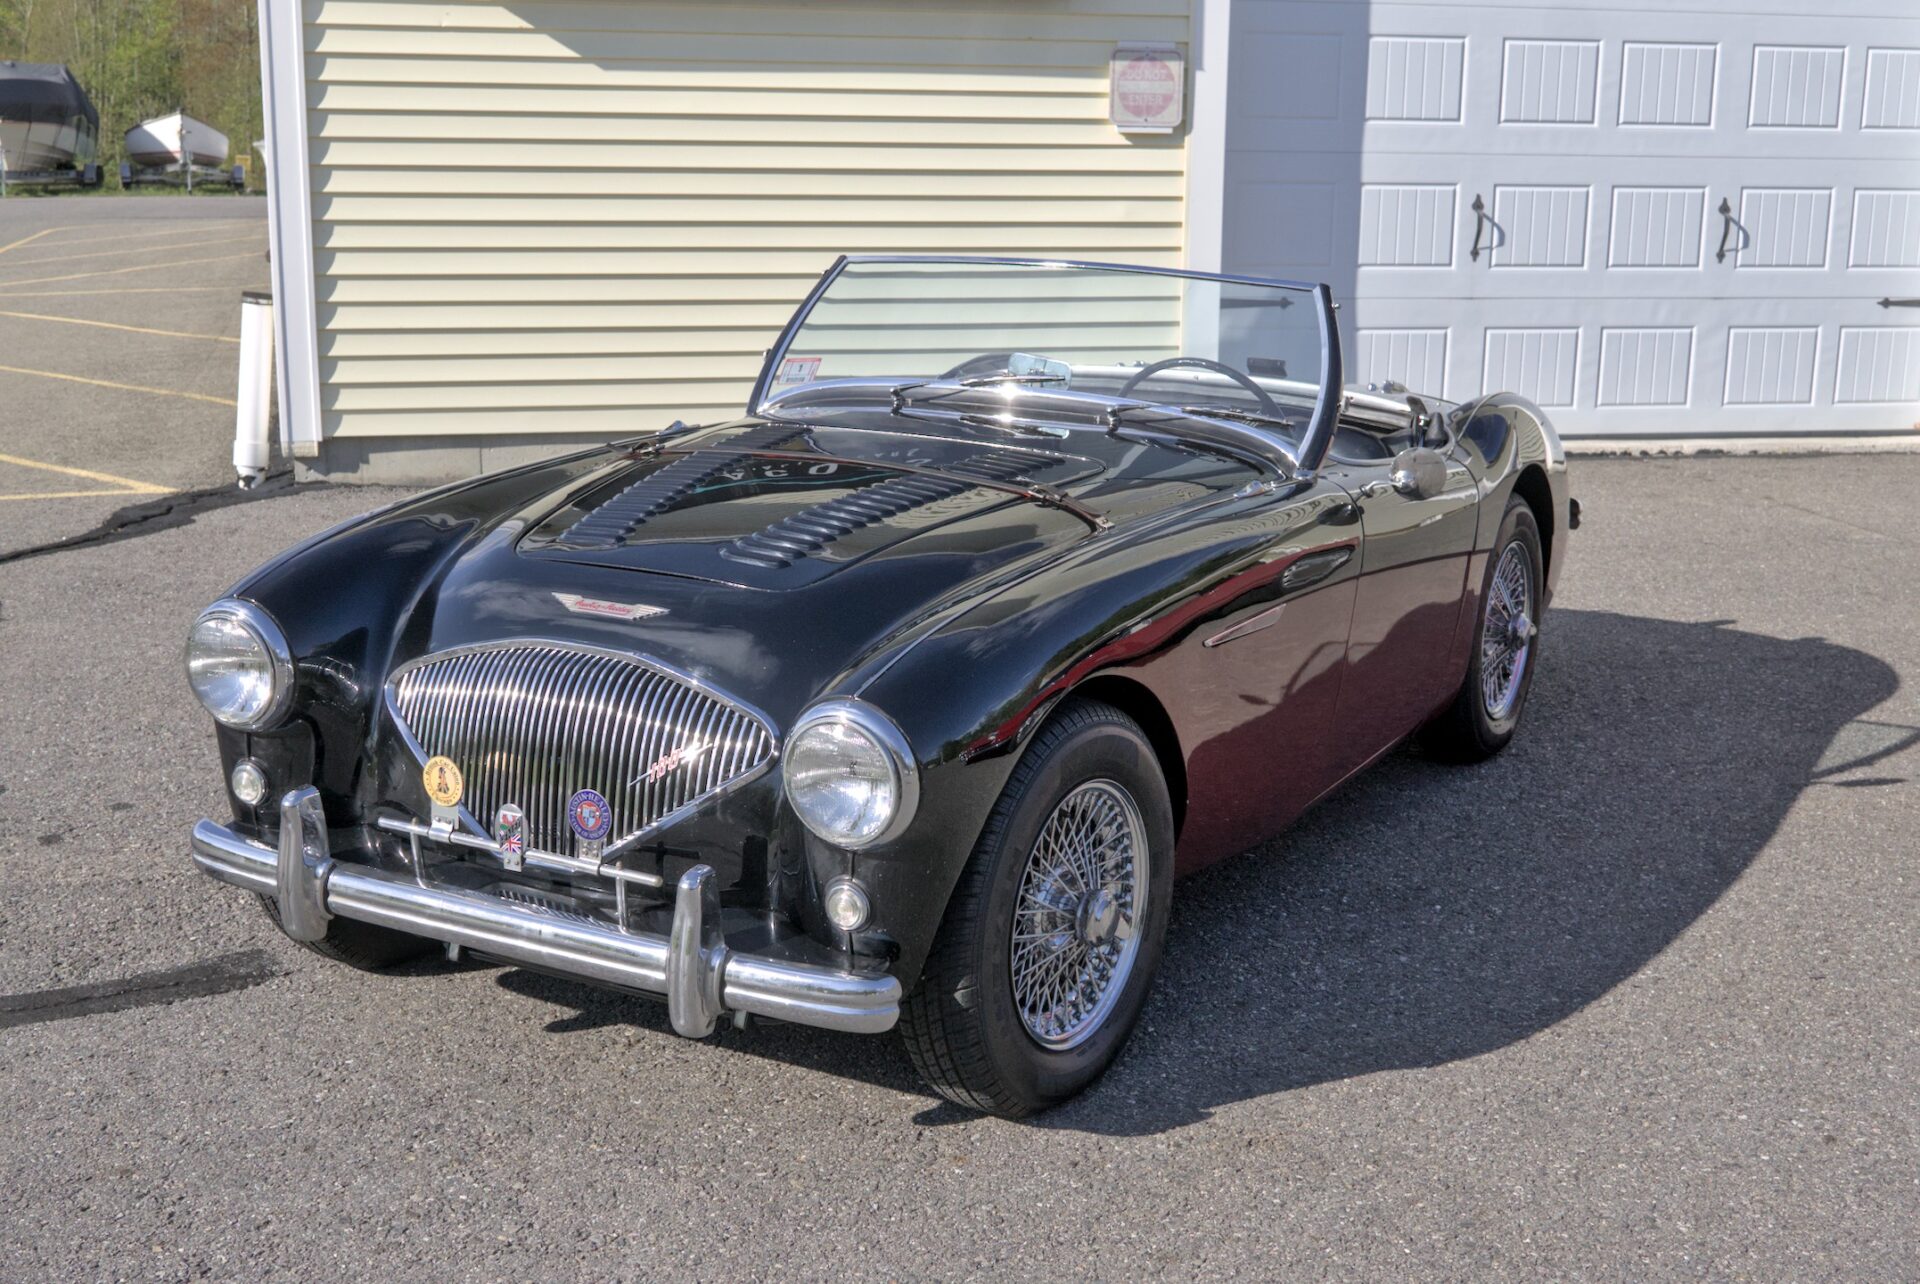 Austin Healey 100-4 BN2 for sale in Candia, NH by Seacoast Specialist Cars, Front Quarter